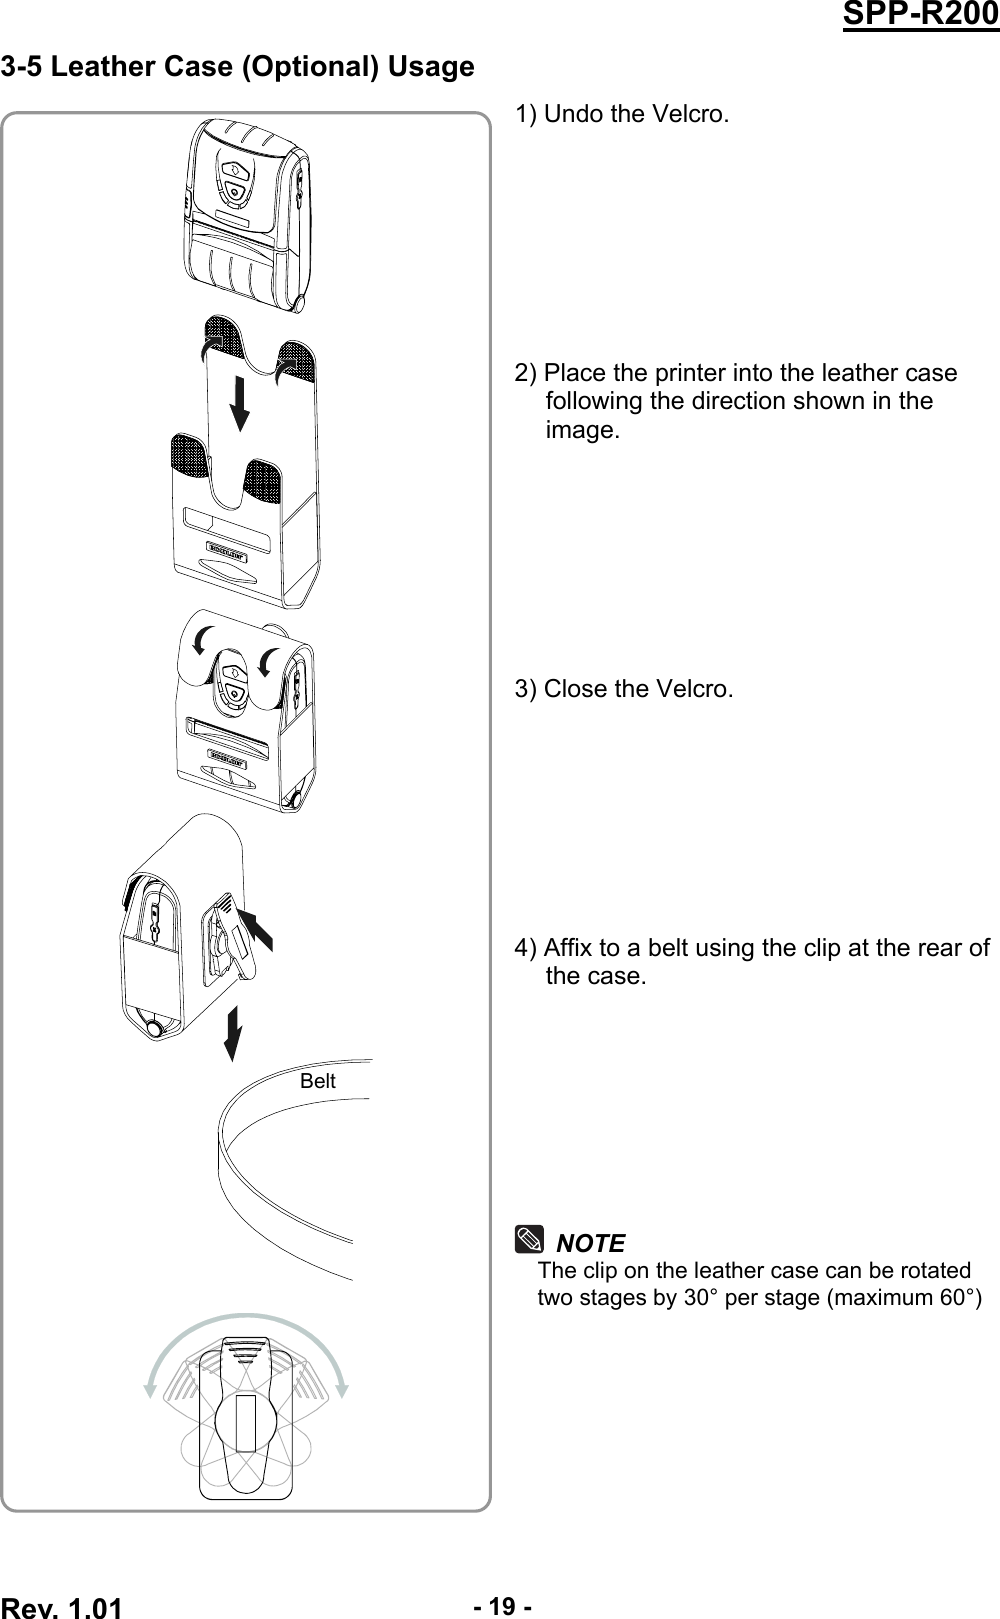  Rev. 1.01  - 19 -SPP-R2003-5 Leather Case (Optional) Usage 1) Undo the Velcro.         2) Place the printer into the leather case following the direction shown in the image.         3) Close the Velcro.         4) Affix to a belt using the clip at the rear of the case.         NOTE The clip on the leather case can be rotated two stages by 30° per stage (maximum 60°)      Belt 